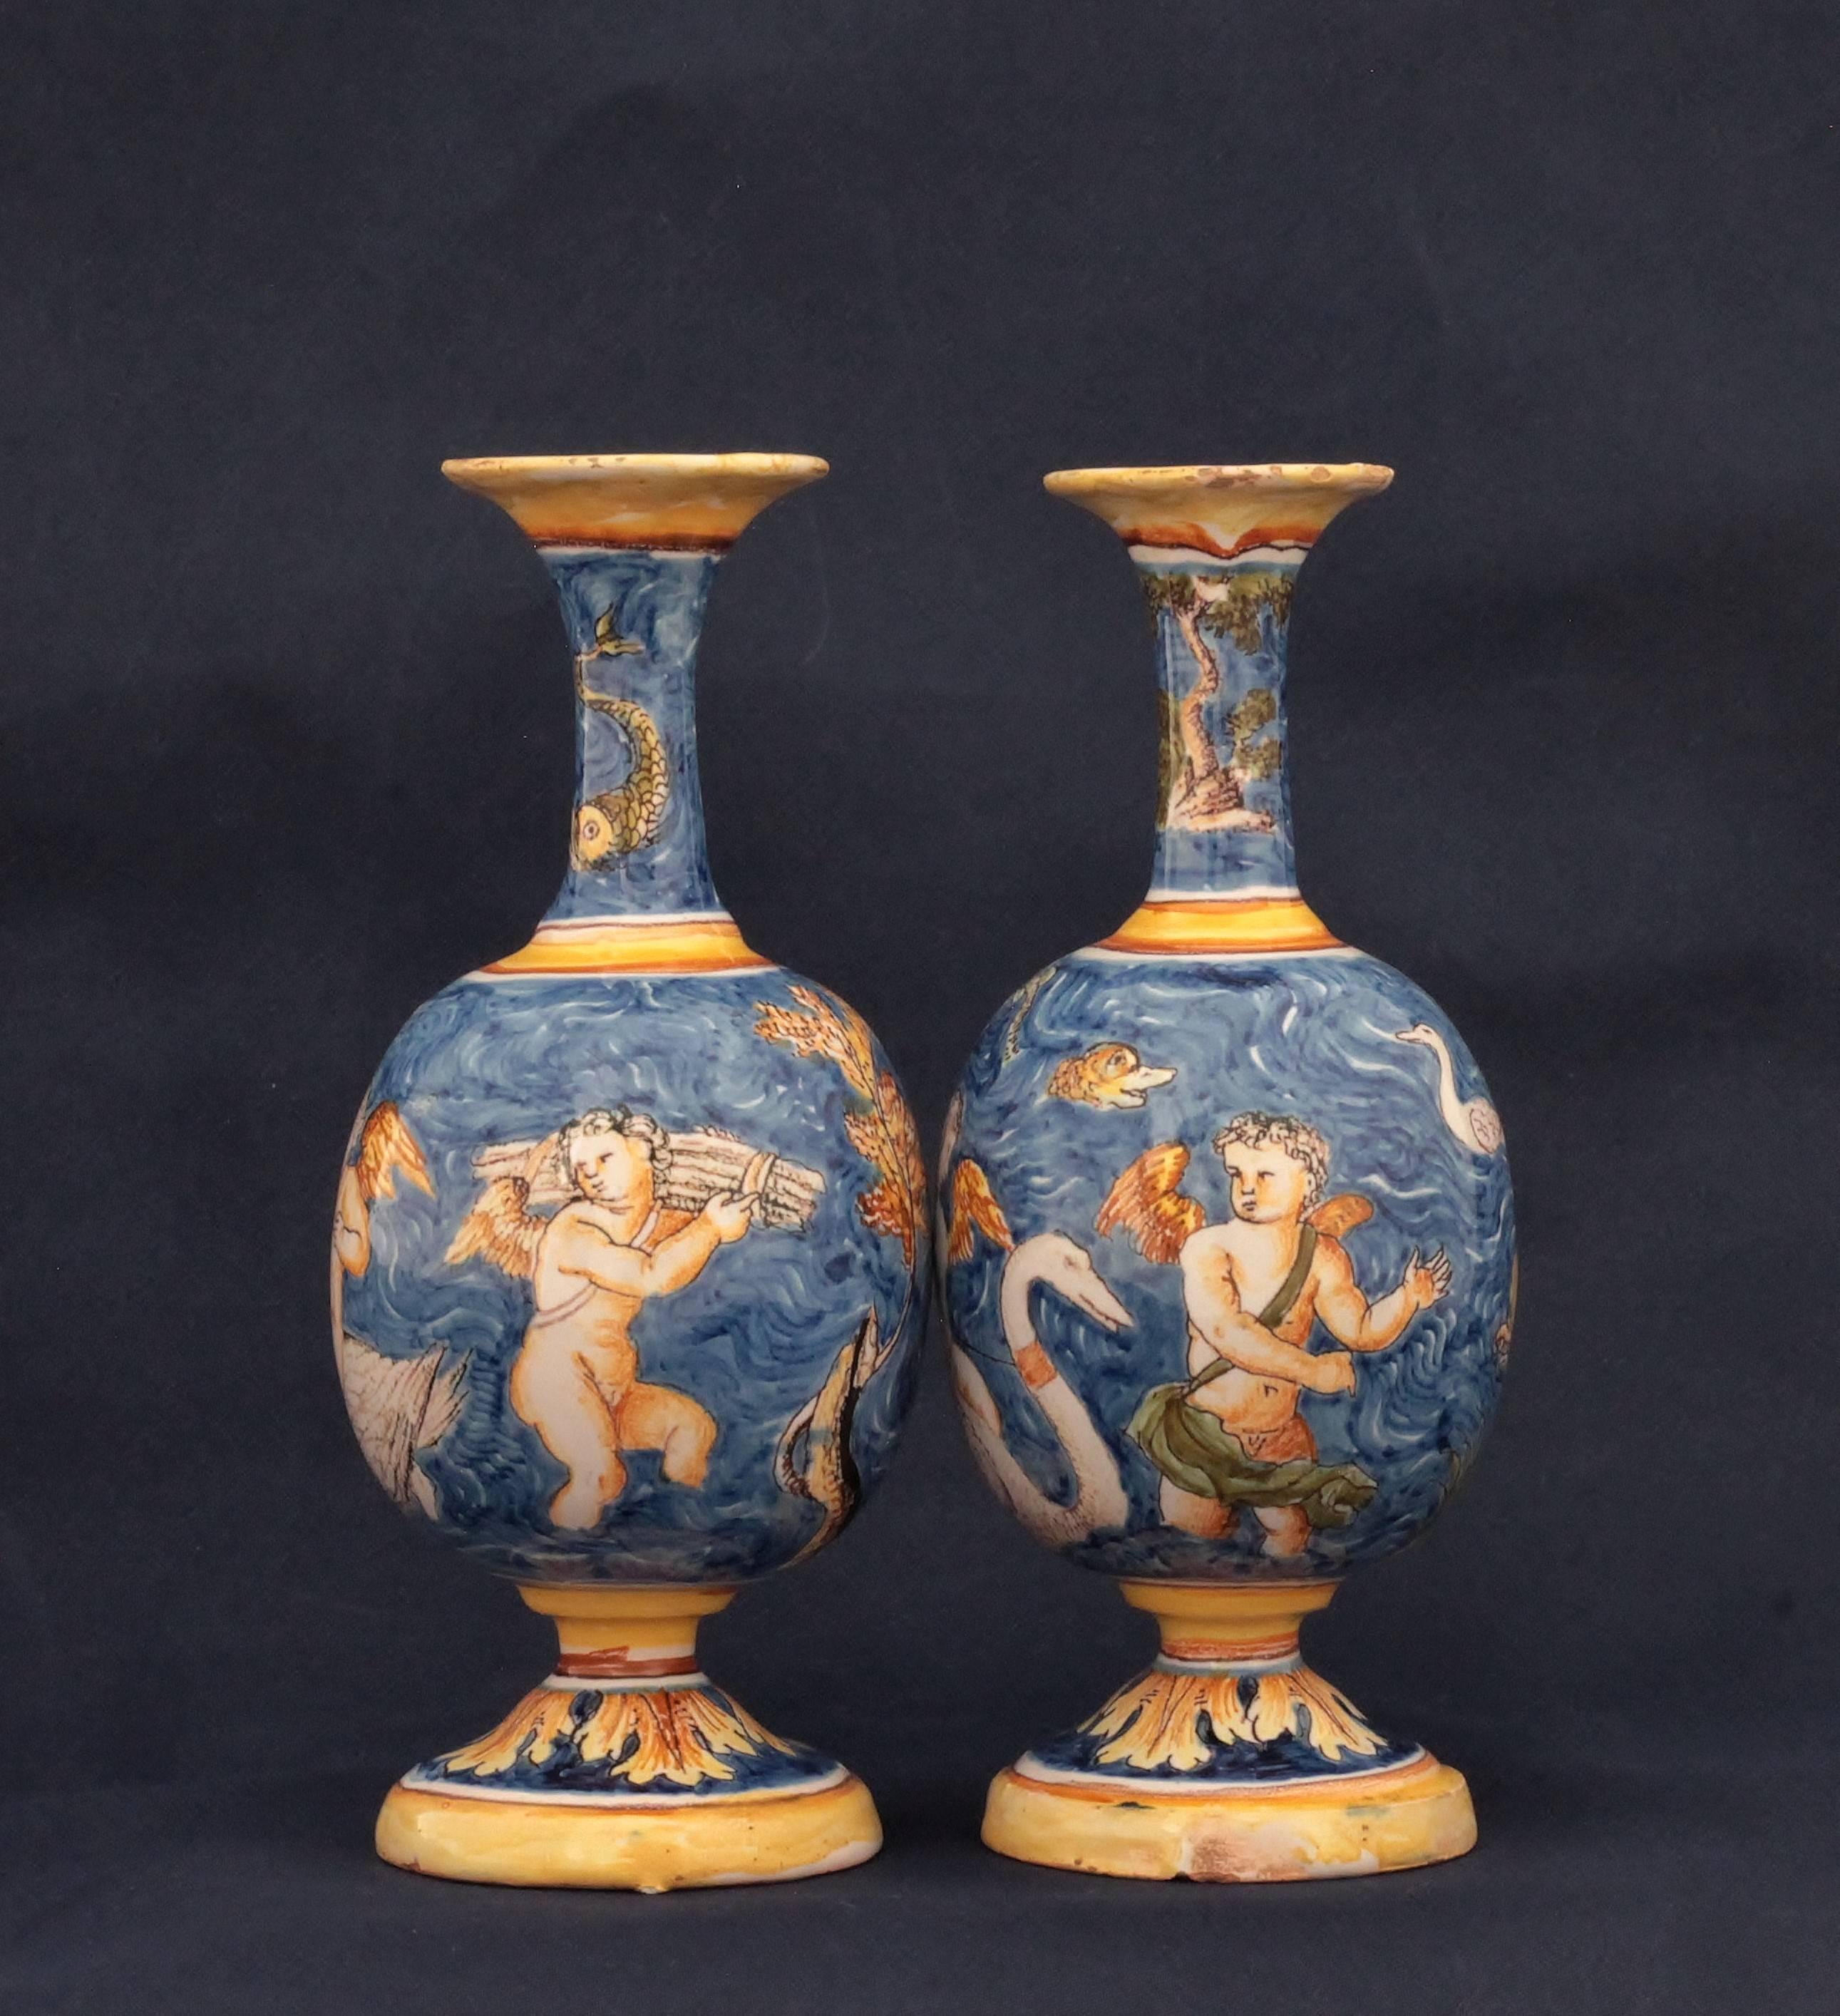 A pair of Nevers faience vases with a bottom with blue waves, 
second half of 17th century.
Measures: H 18.5 cm. 
Origin: Private collection, G. Levy collection.